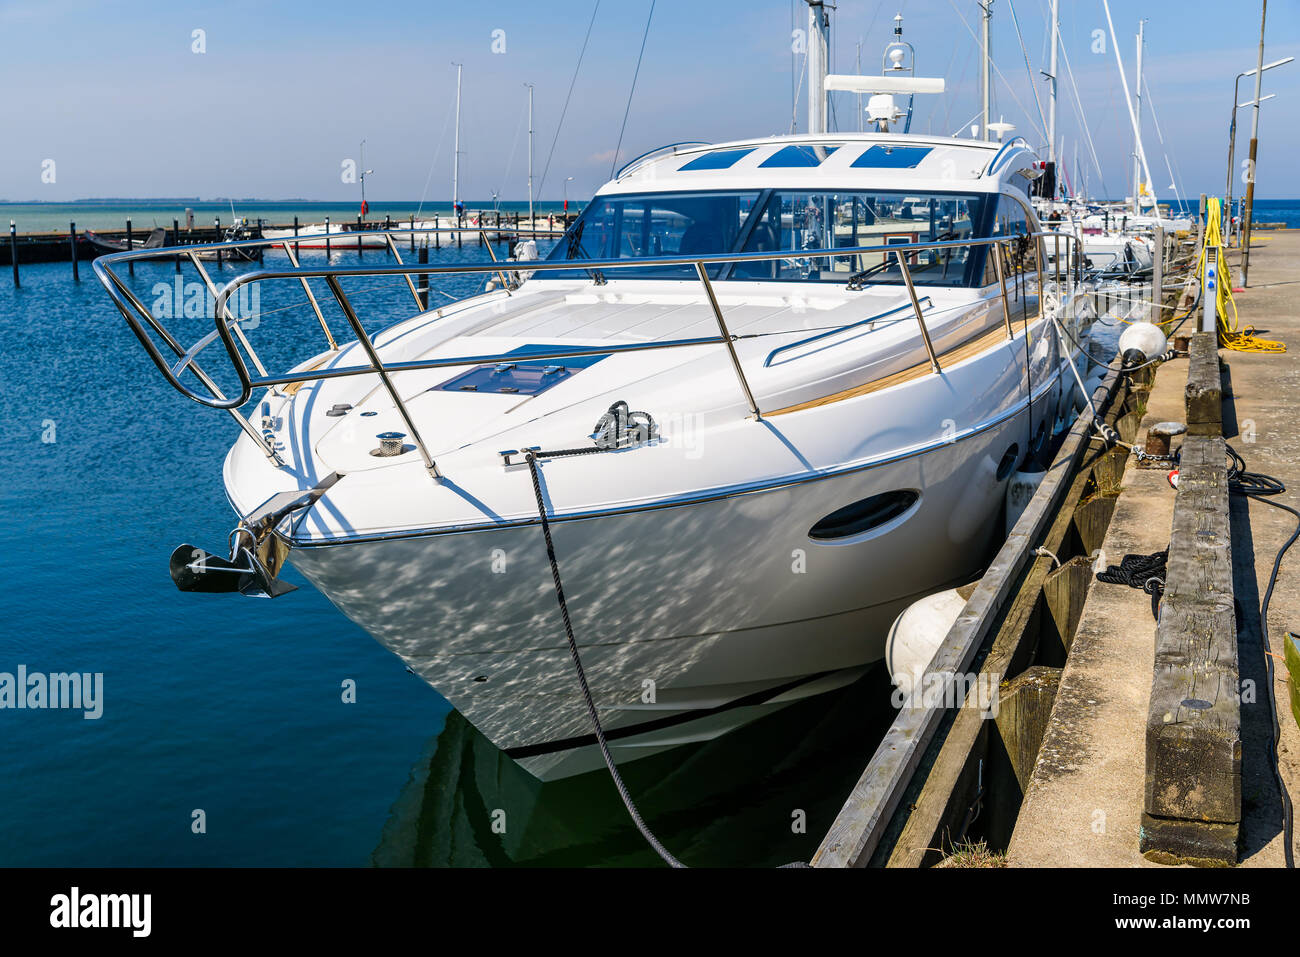 Luxurious motorboat tied to a pier in a marina. Boat seen from the front. Logos and id removed. Stock Photo